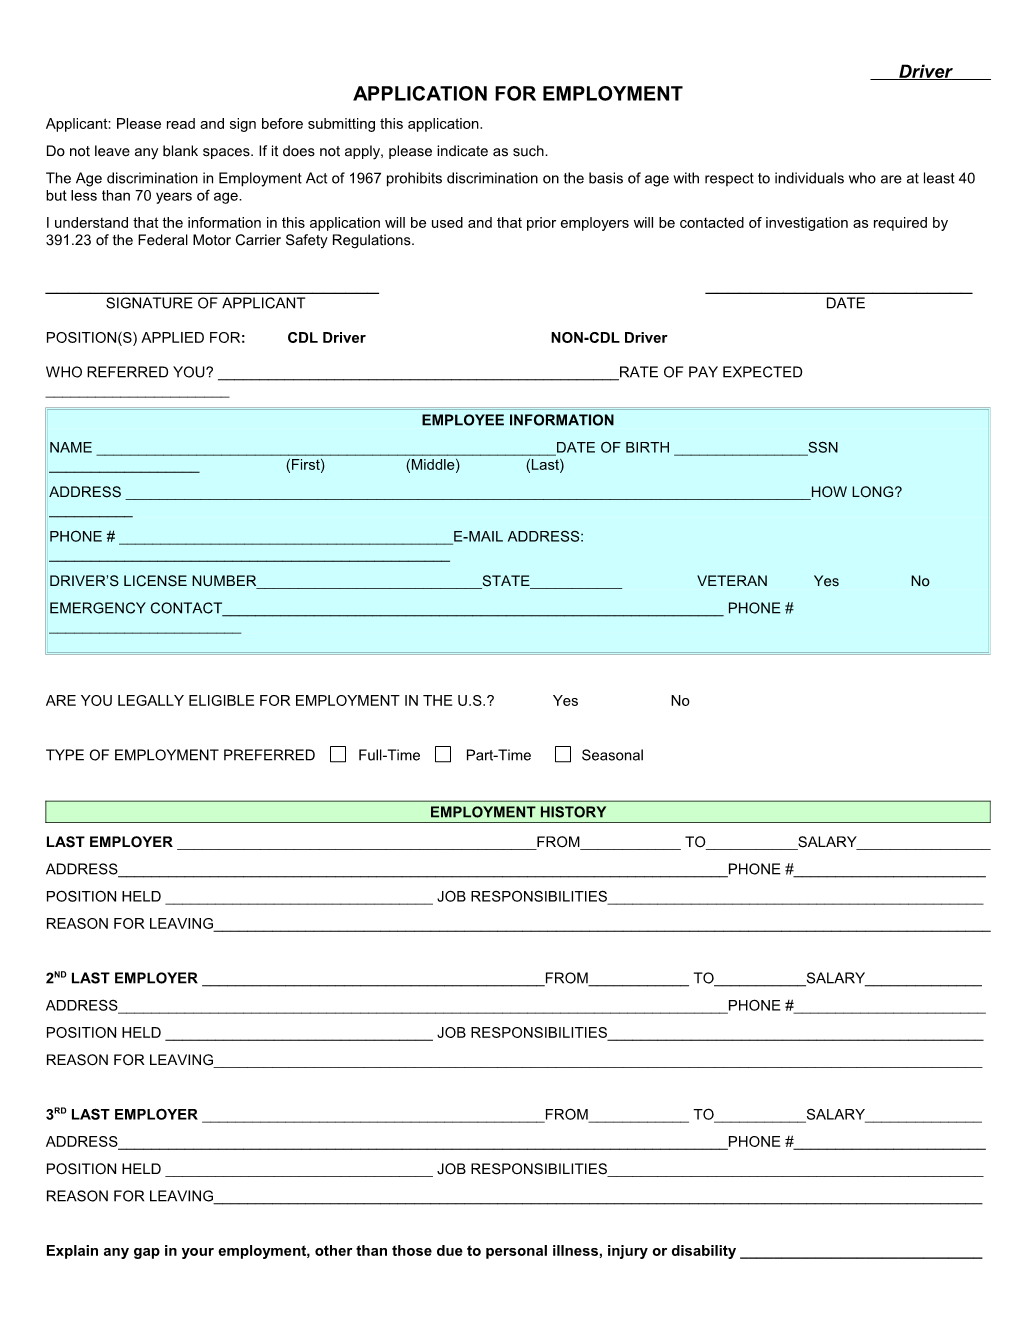 Application for Employment s85